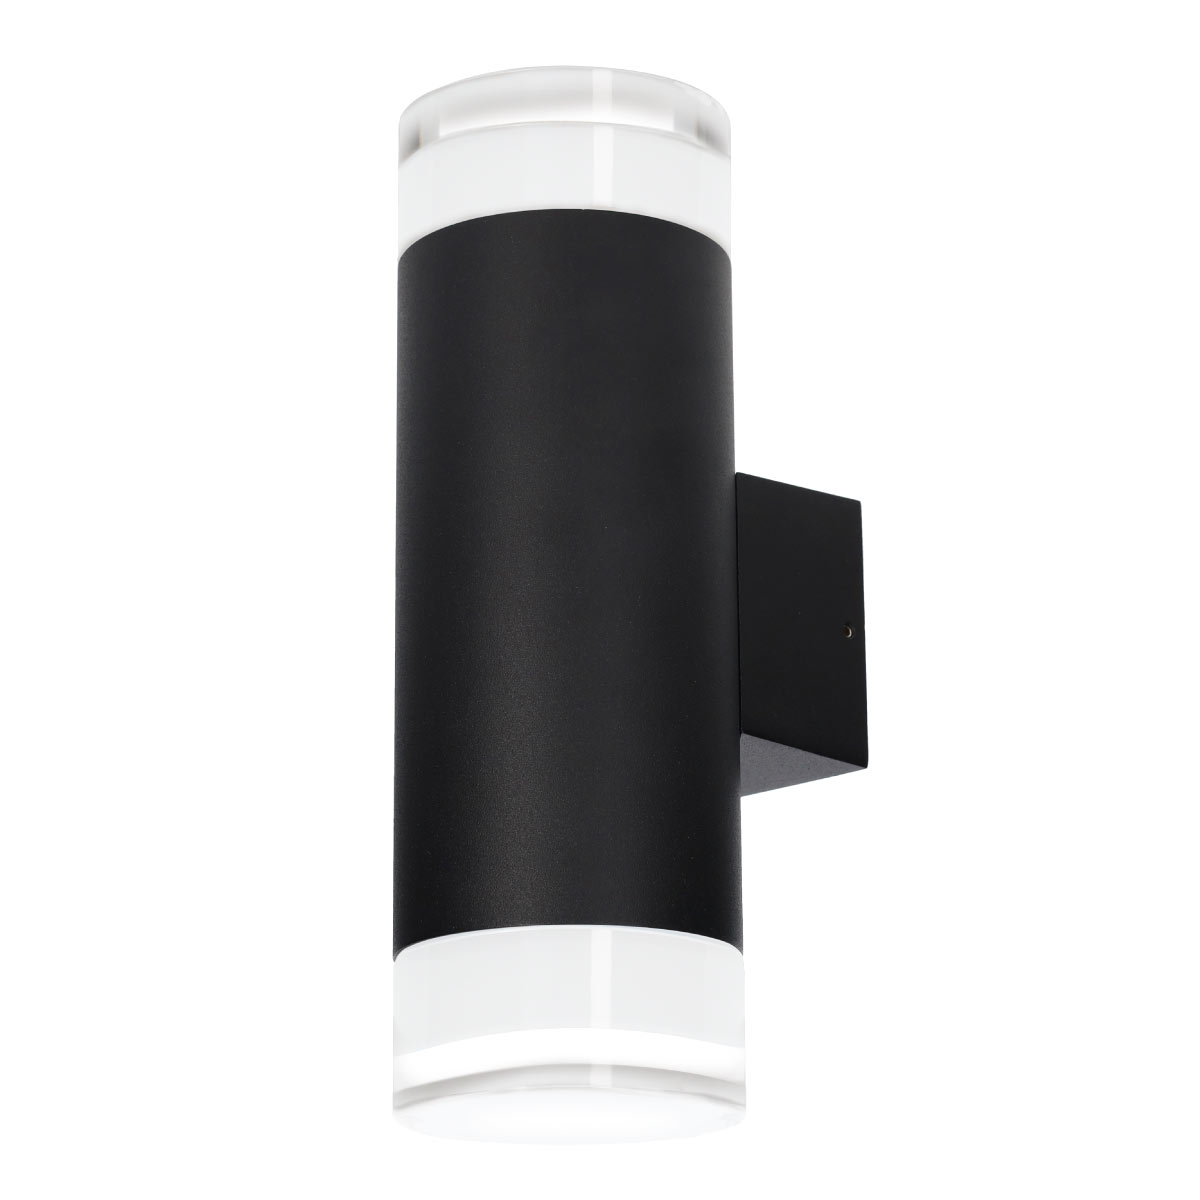 Serie Meluco Exterior double cylindrical wall light GU10